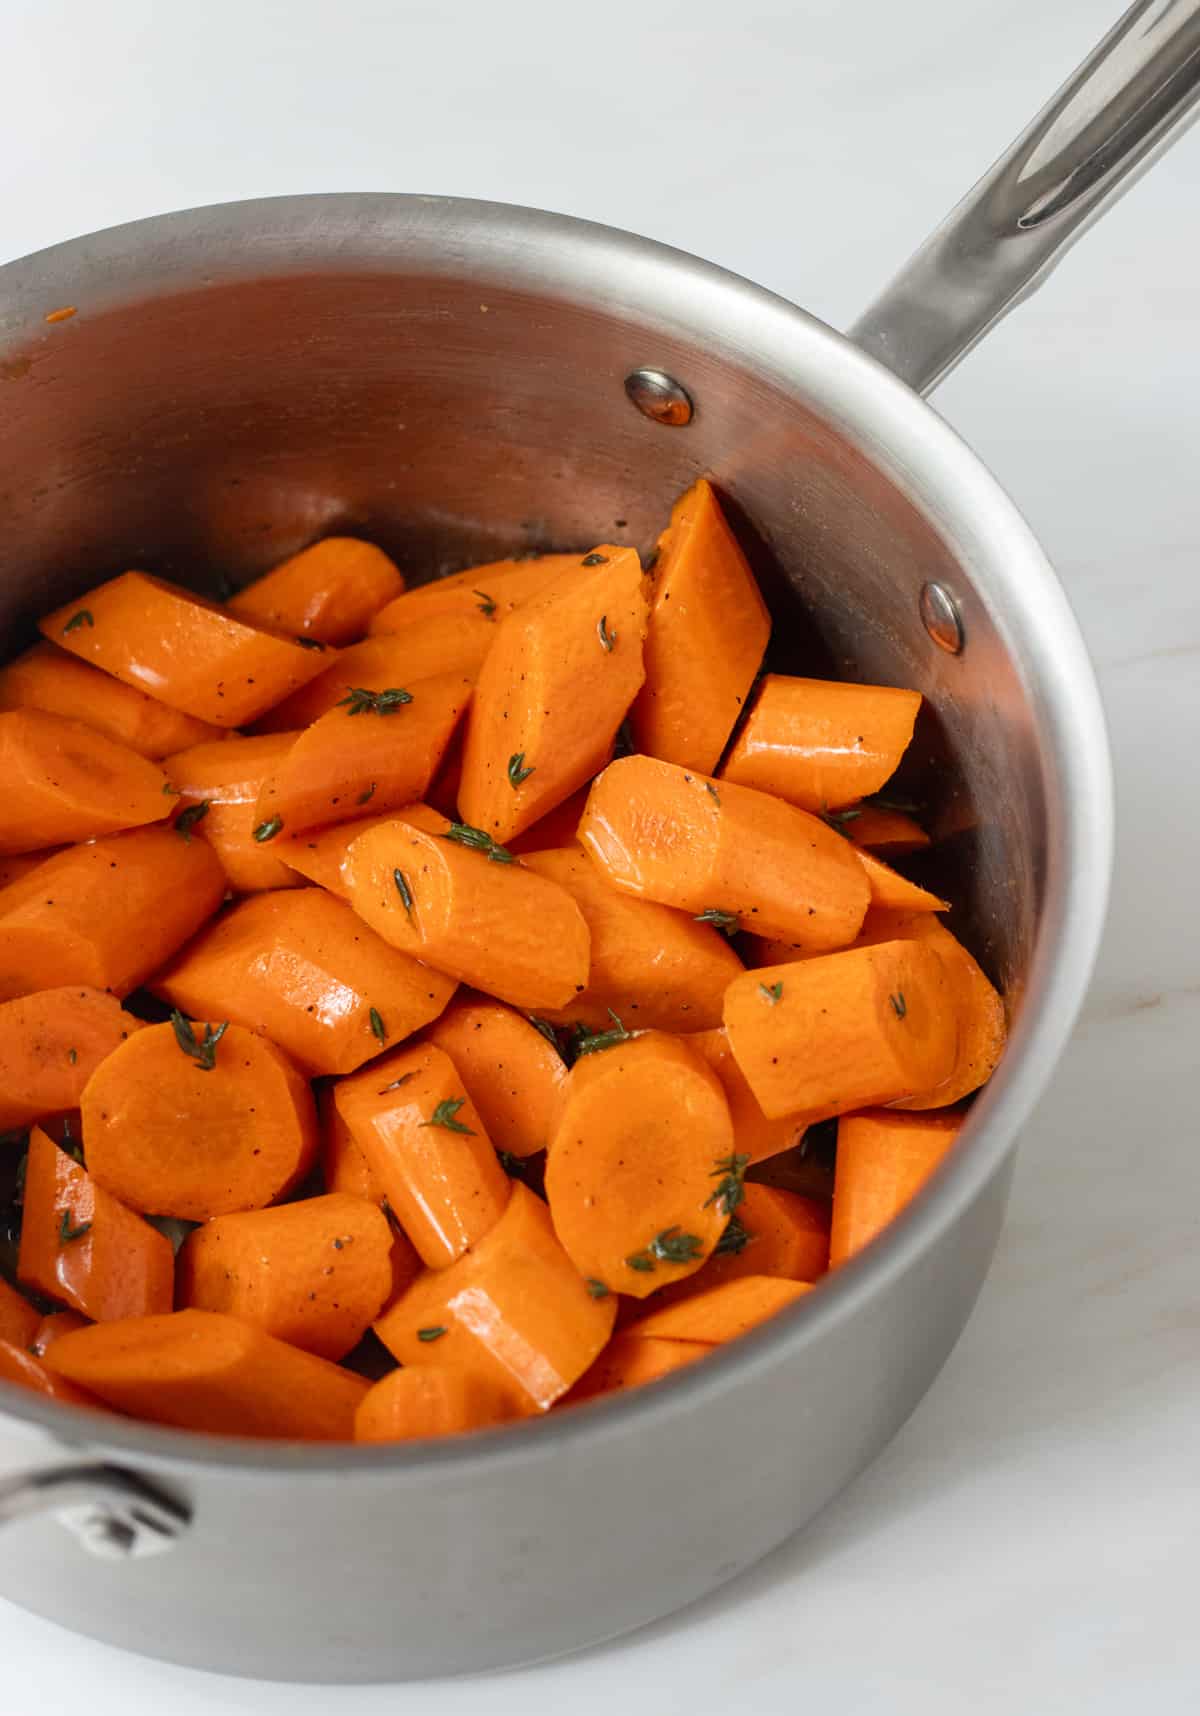 Carrots tossed in honey thyme sauce in a saucepan.